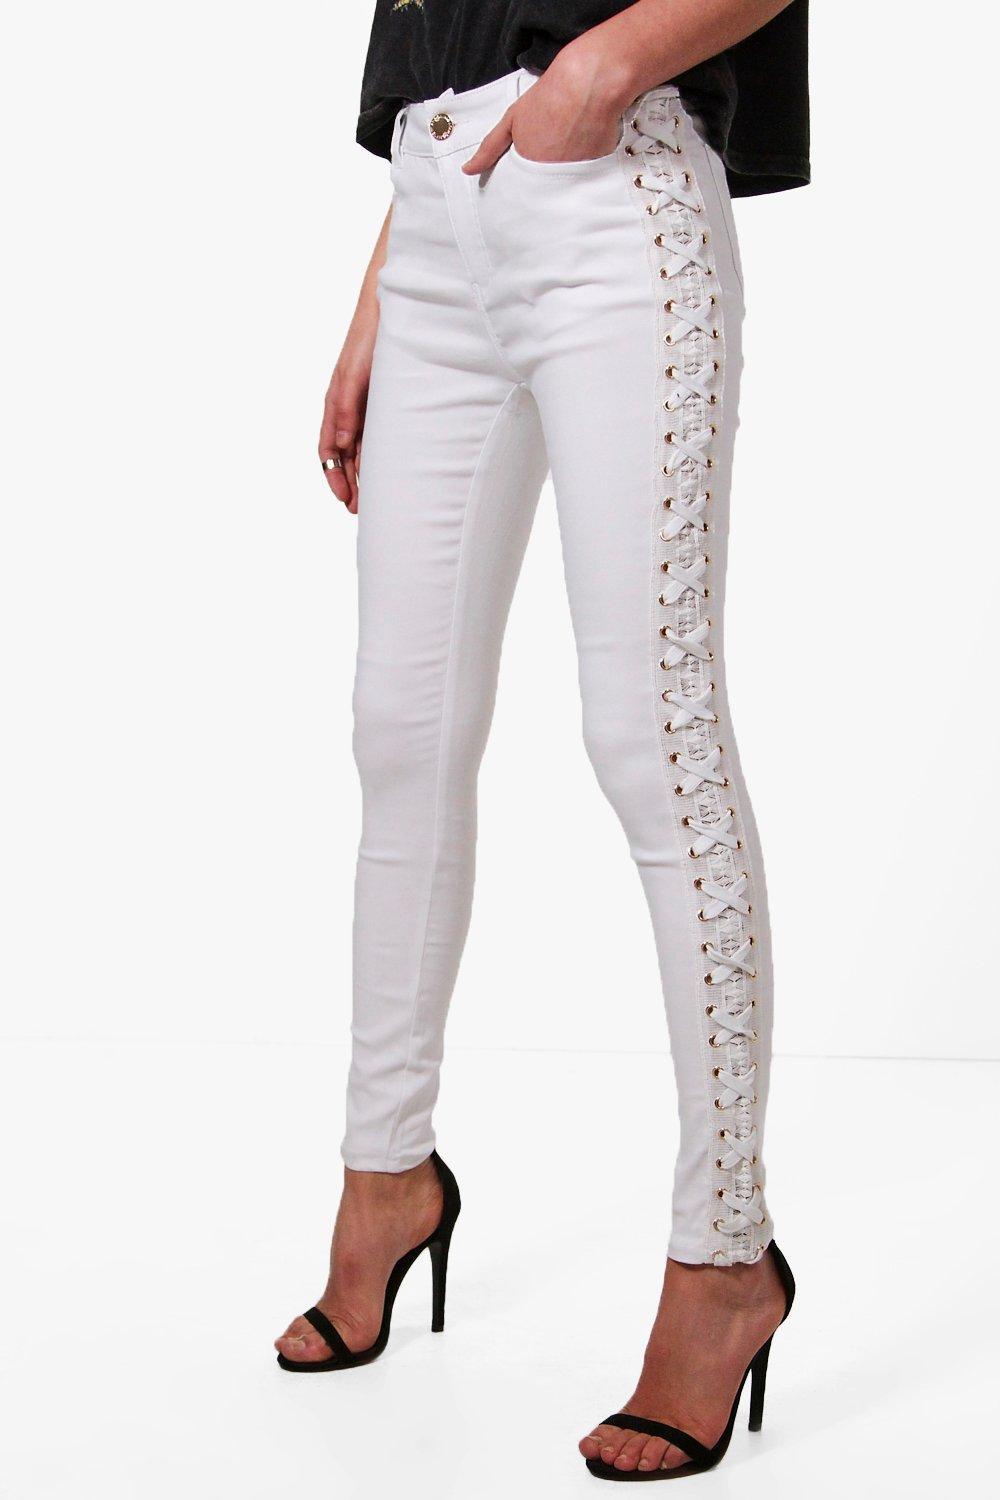 Boohoo Denim Selma Side Lace Up Skinny Jeans in White - Lyst